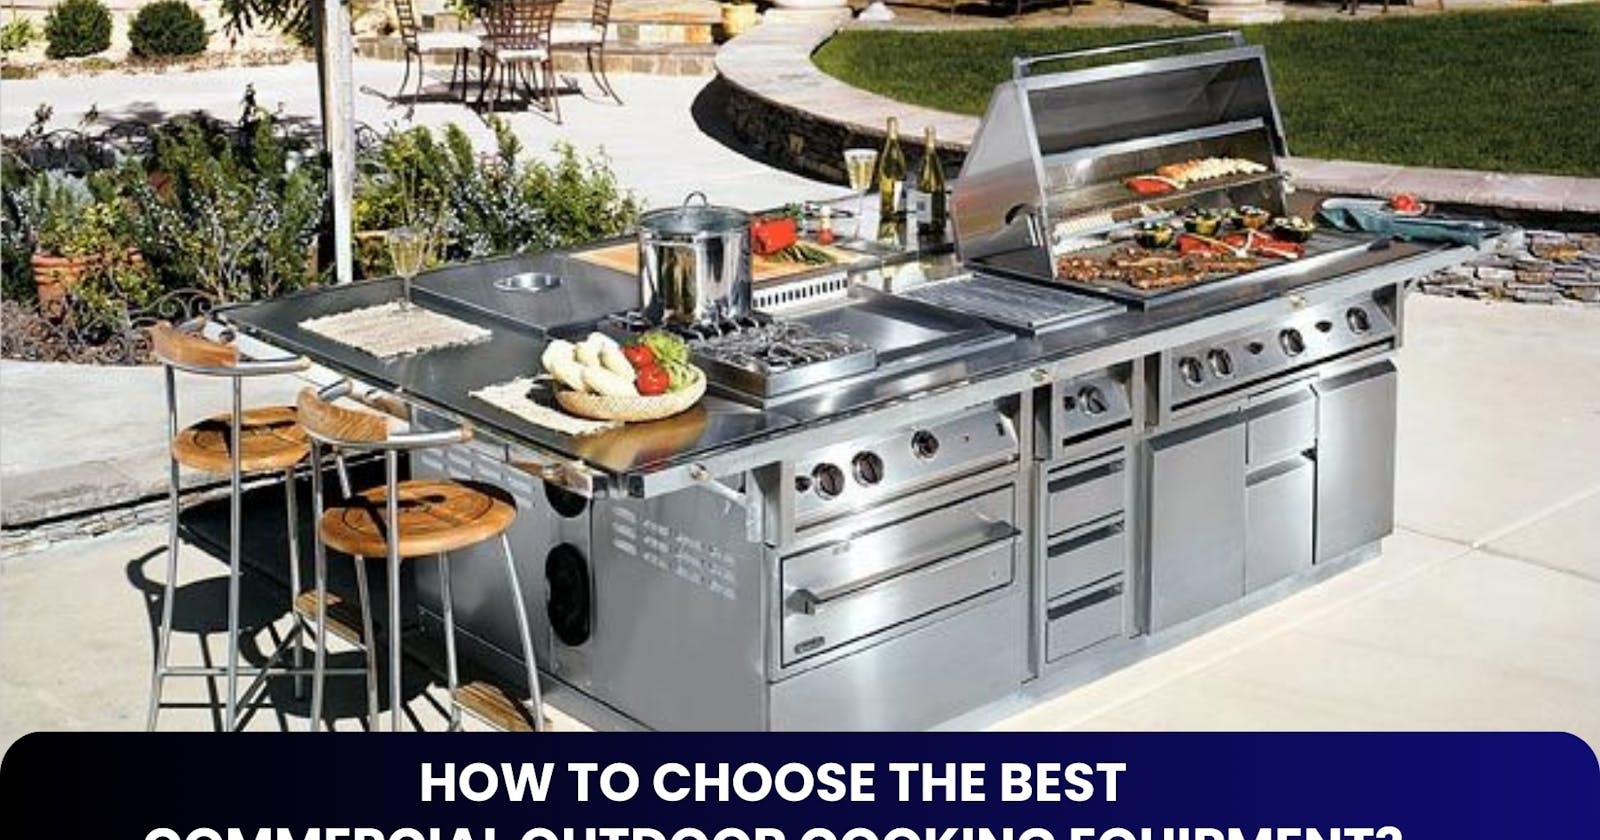 How to Choose the Best Commercial Outdoor Cooking Equipment?